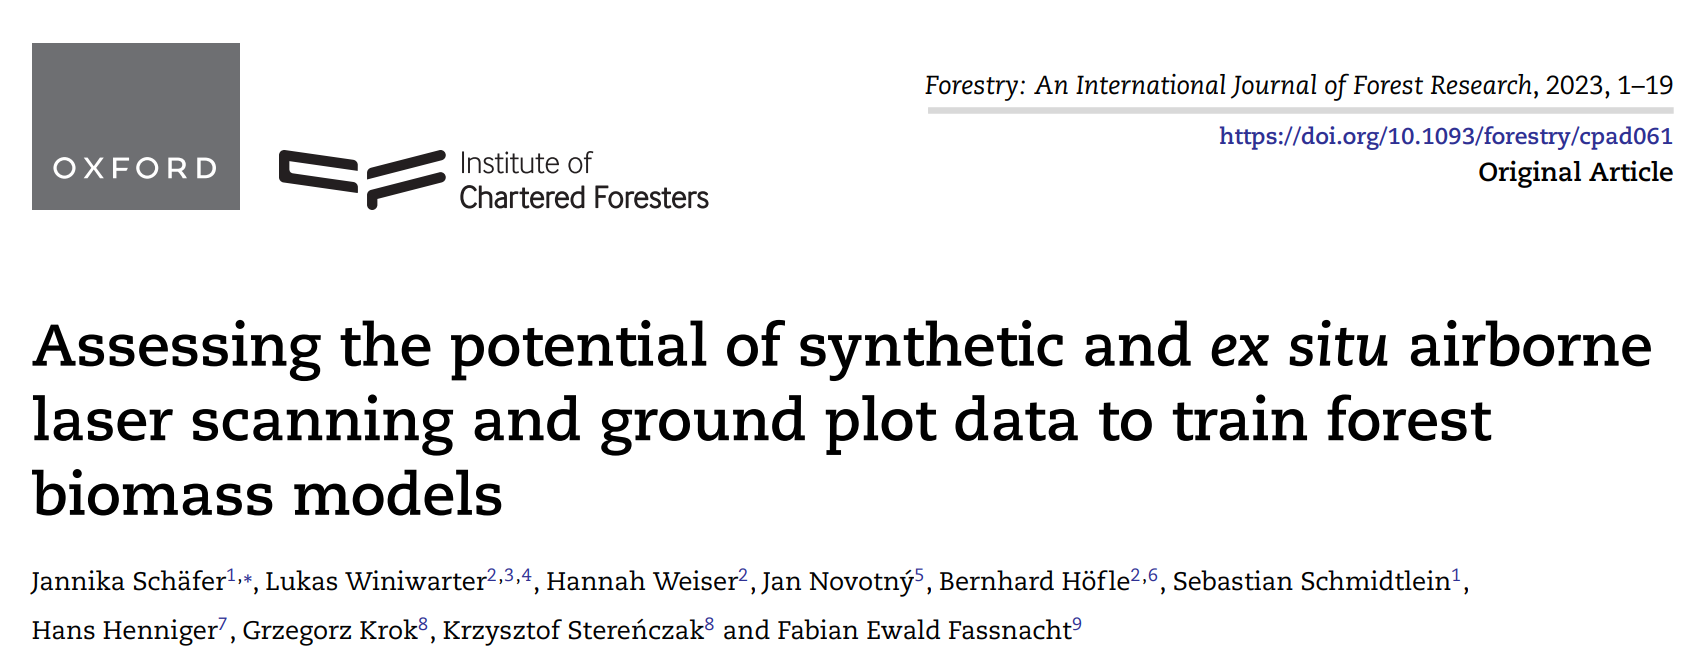 New paper on the potential of simulated laser scanning and field data to train forest biomass models